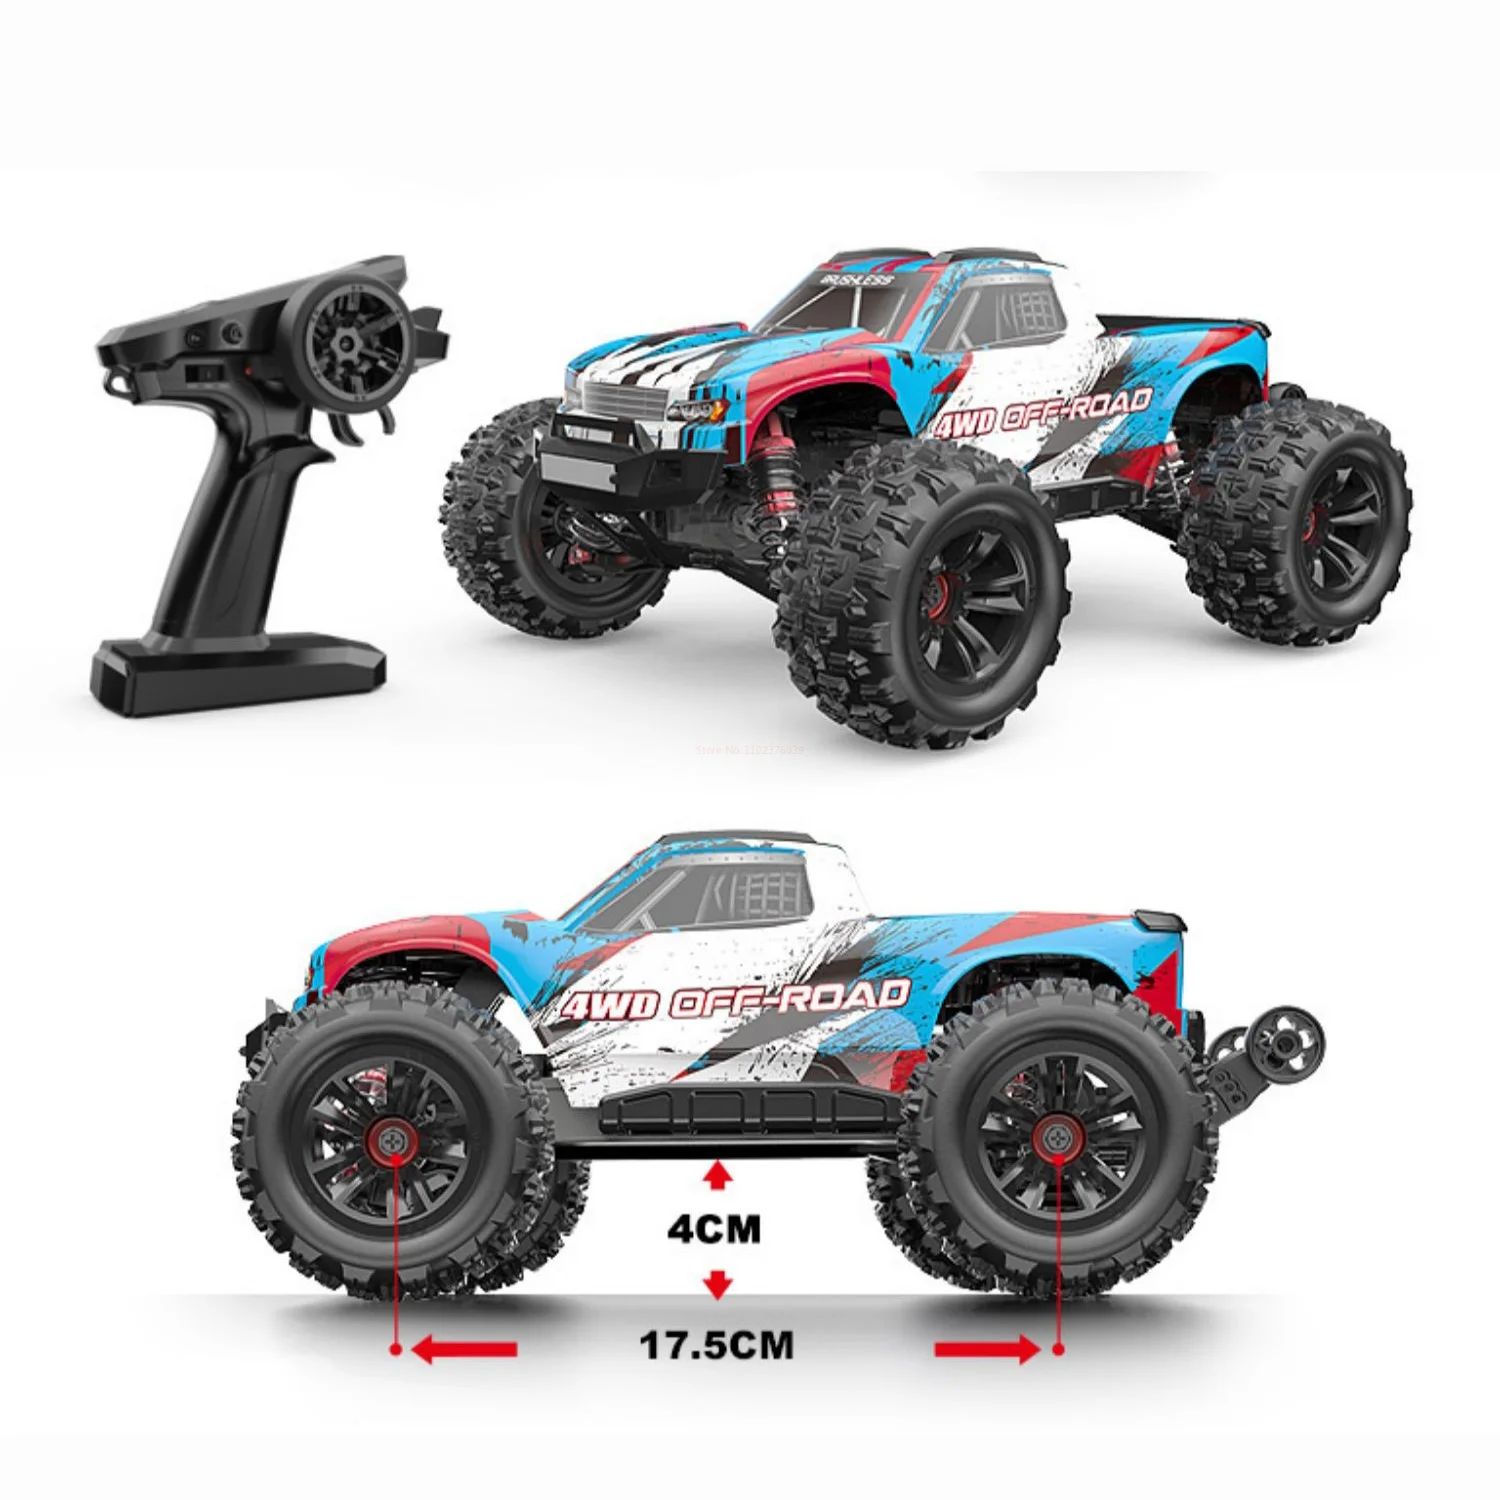 

Mjx Hyper Go 14301/14302 1/14 Remote Control Pickup Brushless Rc Car 2.4g 4wd High-Speed Off-Road Off-Road Vehicle Boy Toy